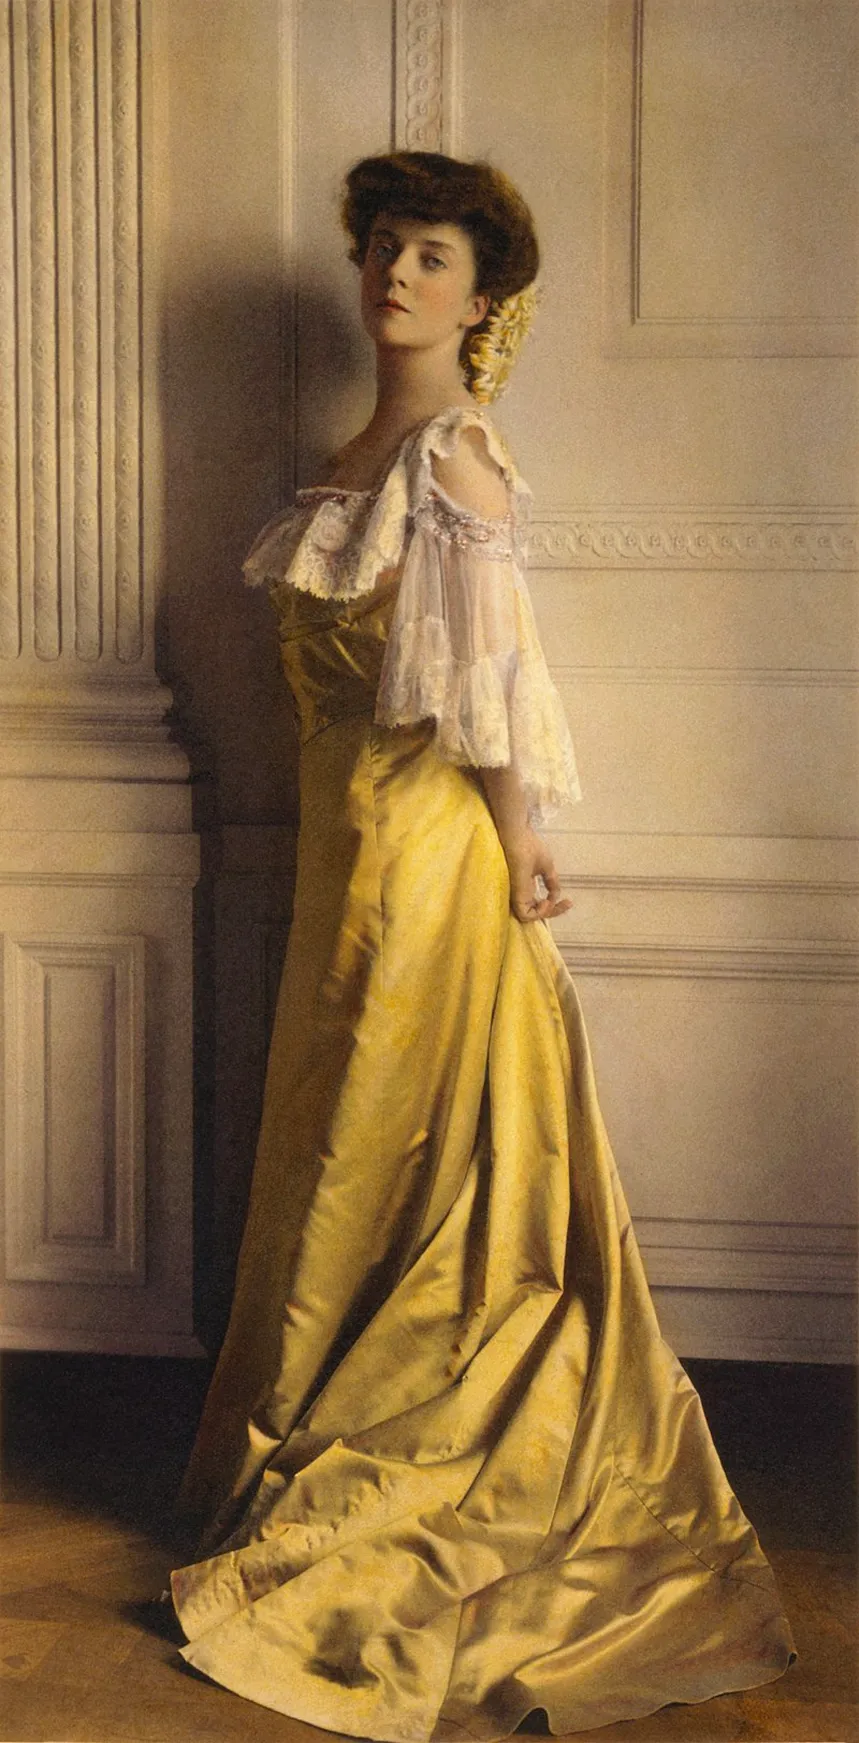 Hand-tinted 1903 photograph of Alice